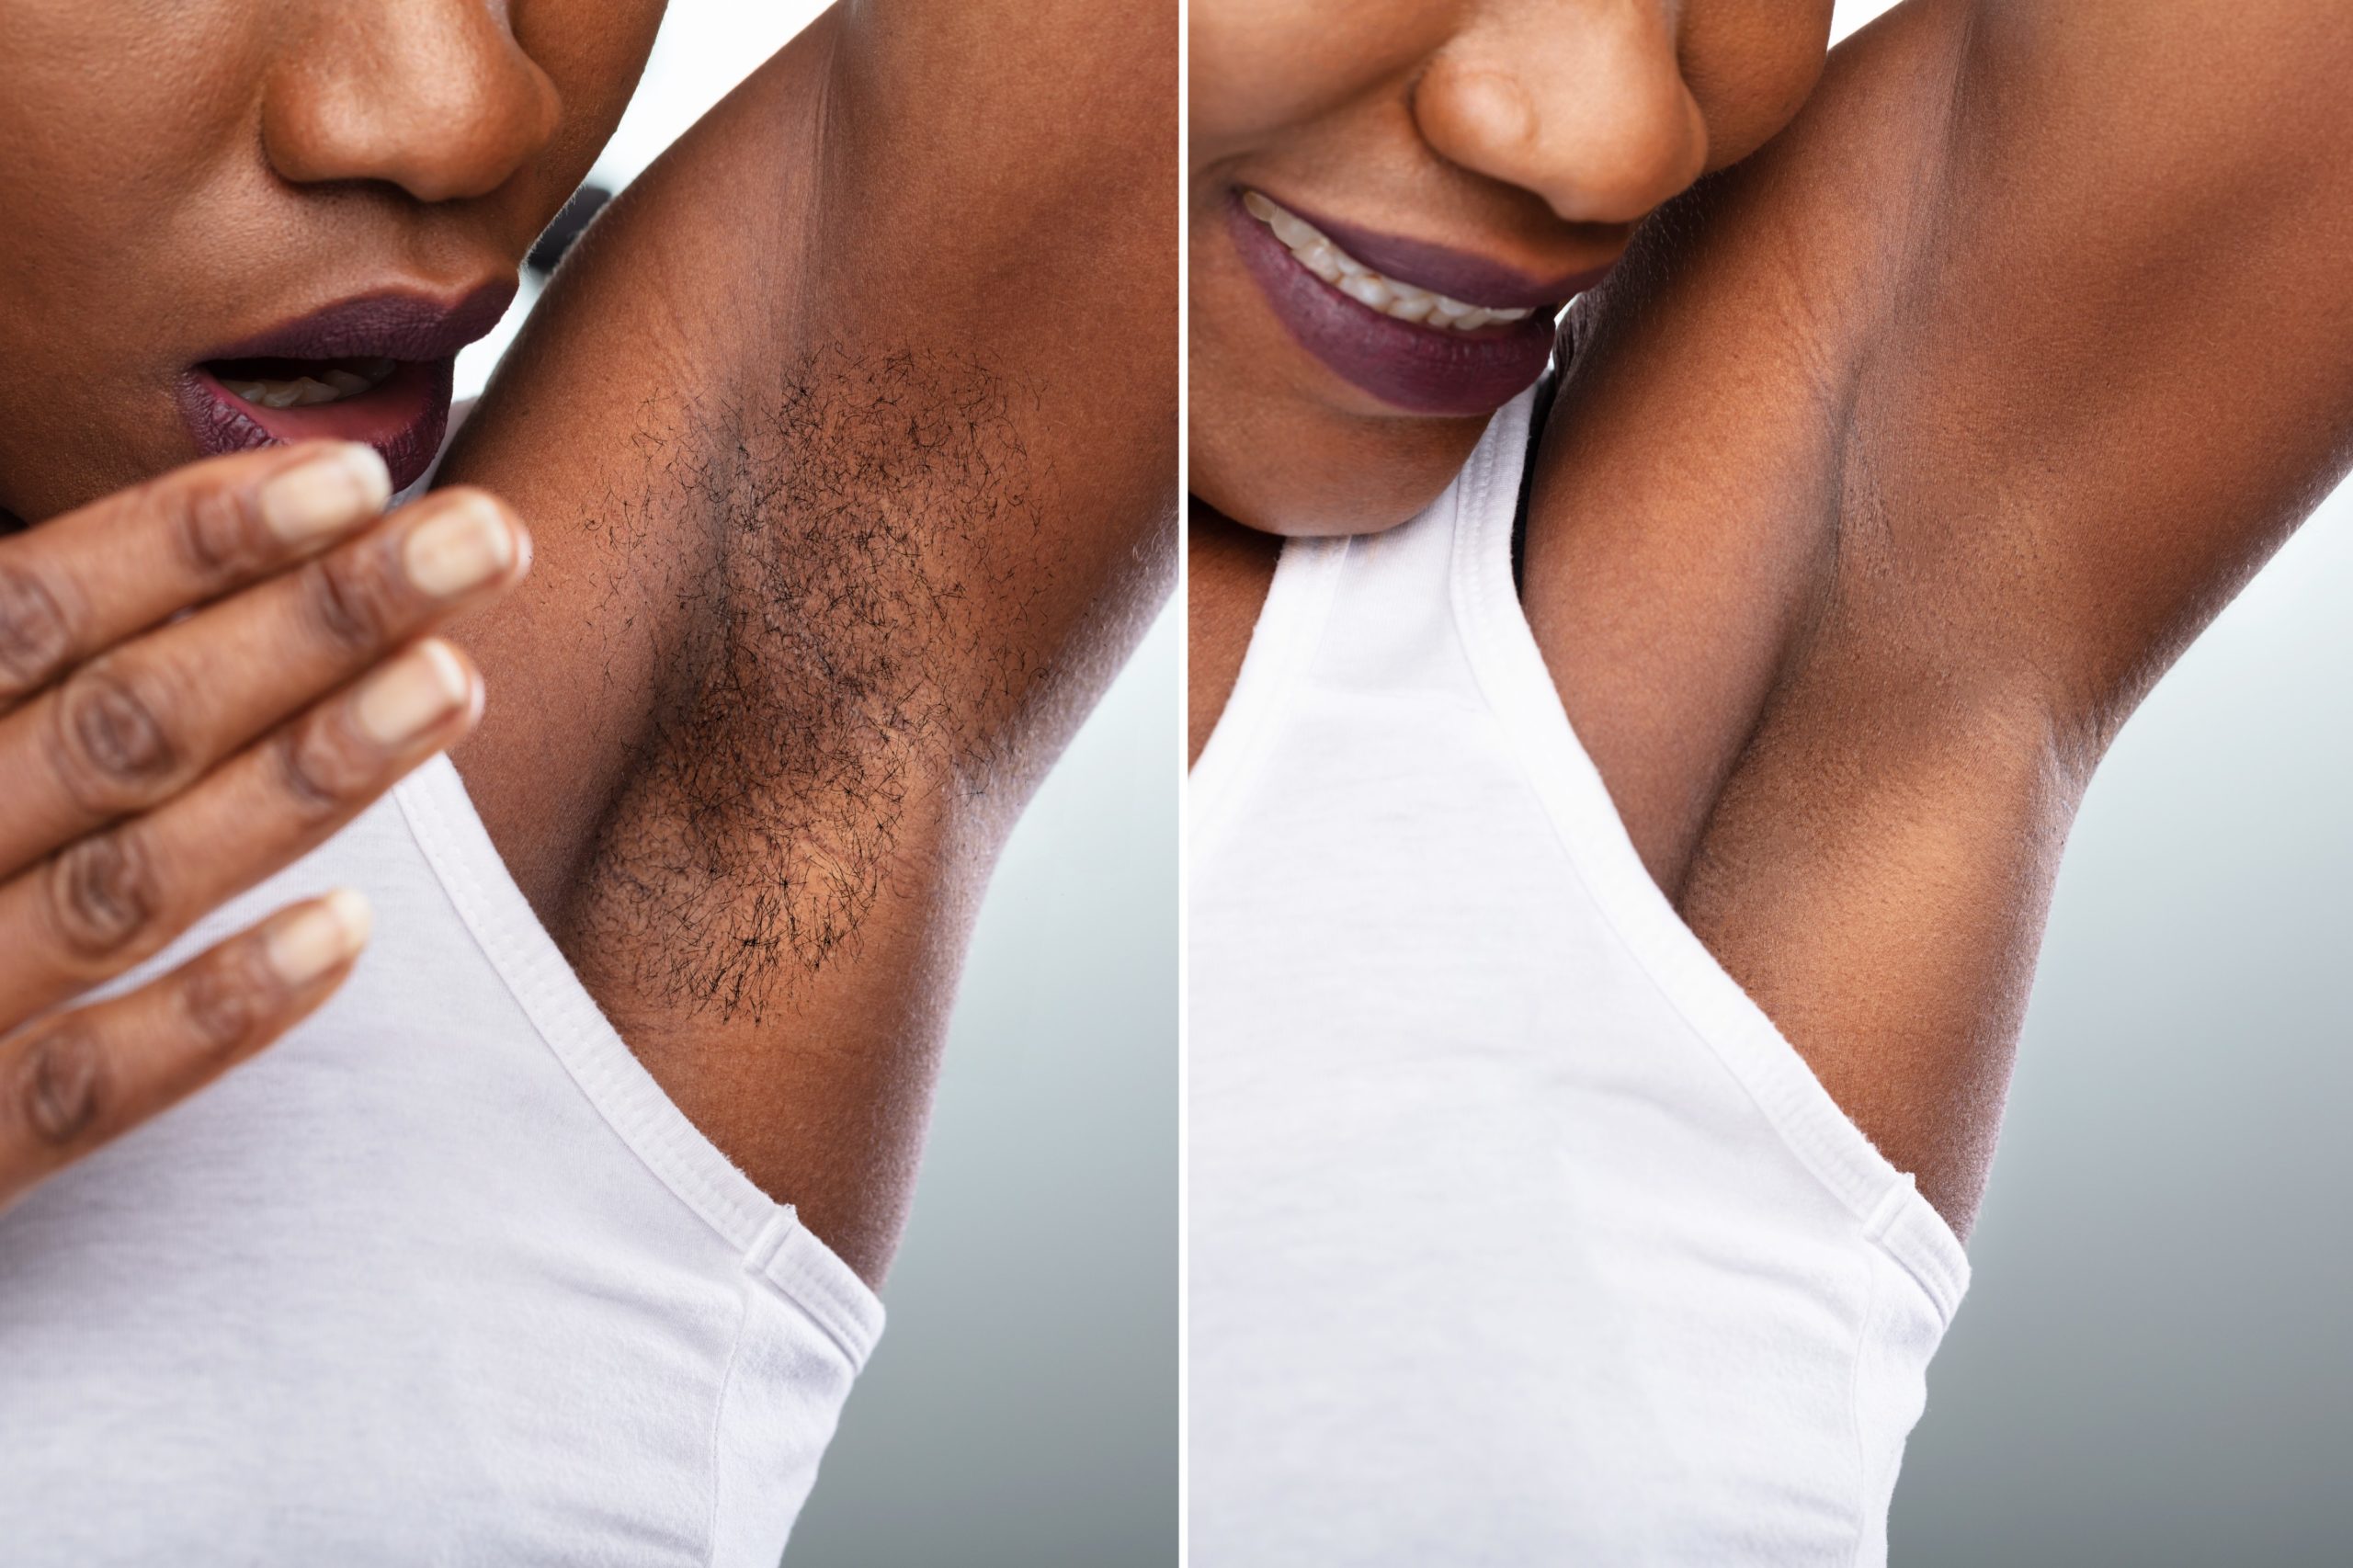 <img src="before.jpg" alt="before and after hair removal"/> 